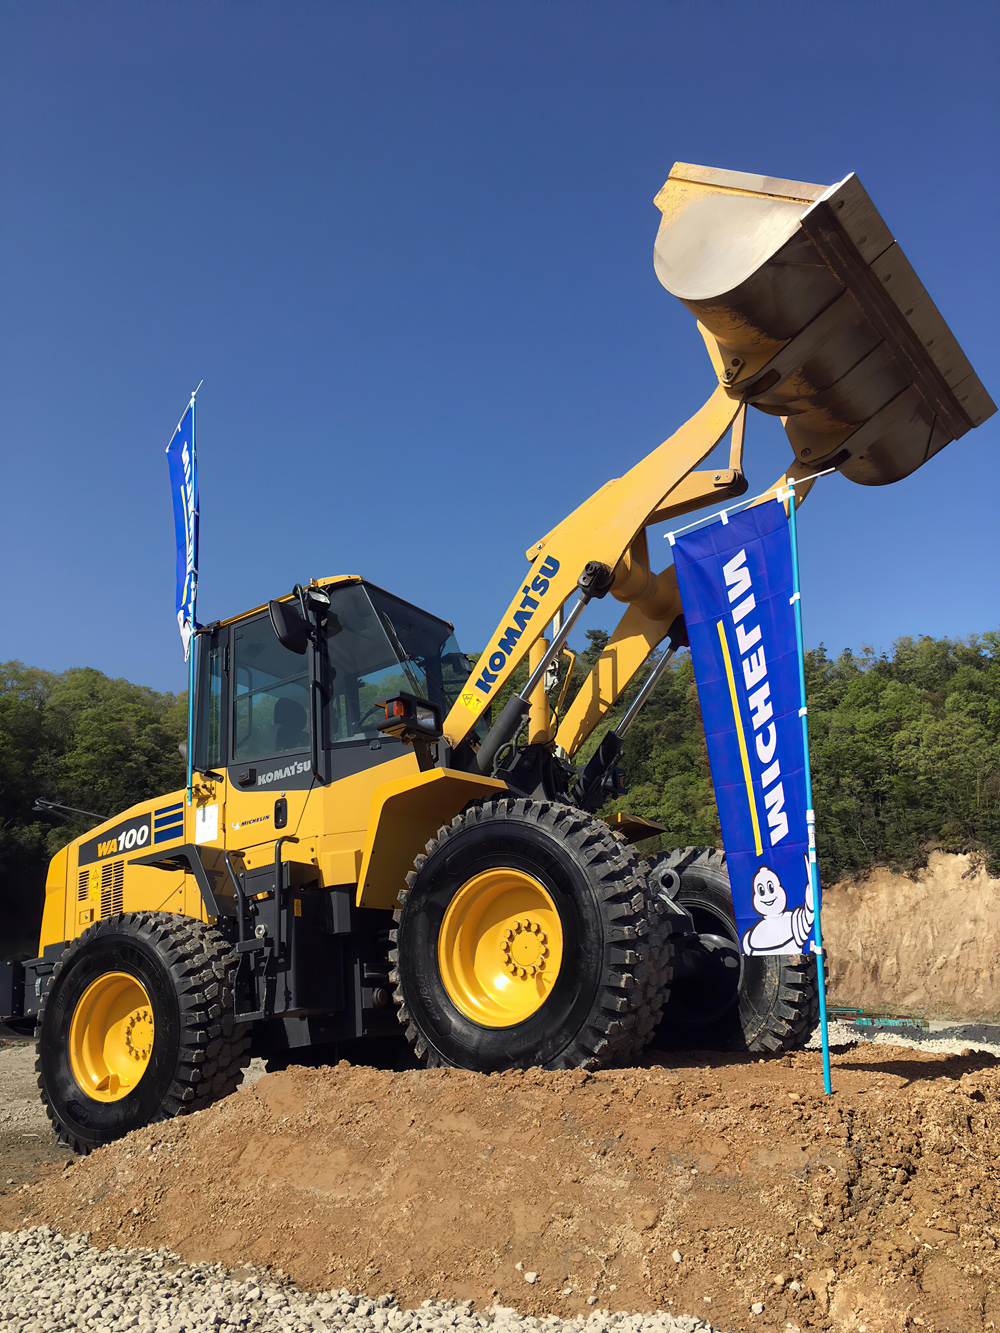 Michelin has launched two new sizes in its CrossGrip tyre range for loaders